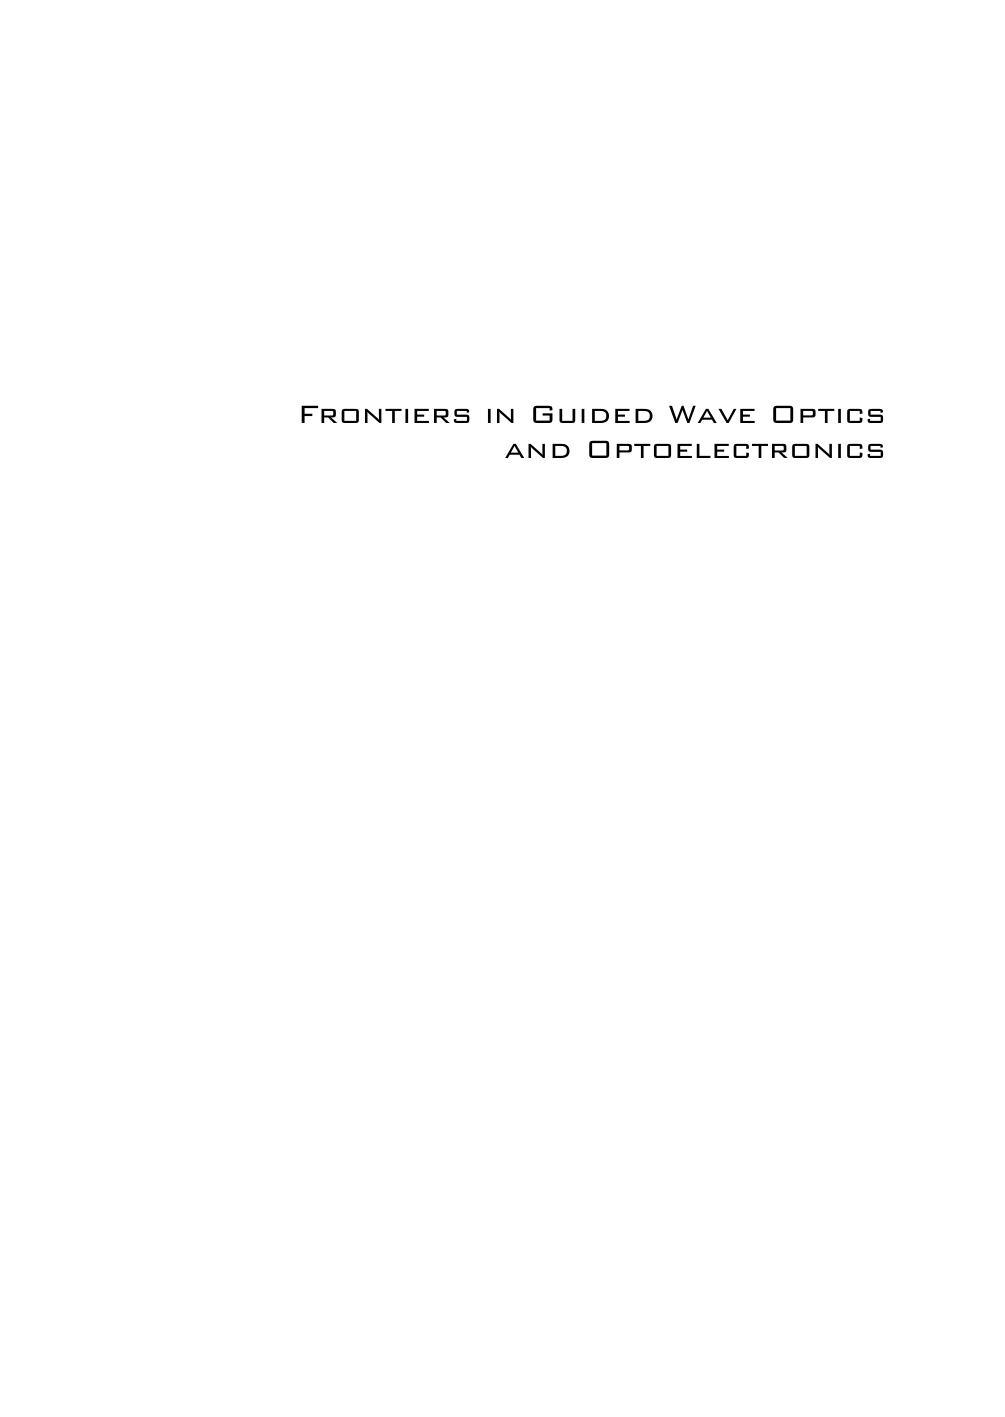 Microsoft Word - Preface&Contents_Frontiers_in_Guided_Wave_Optics_and_Optoe…